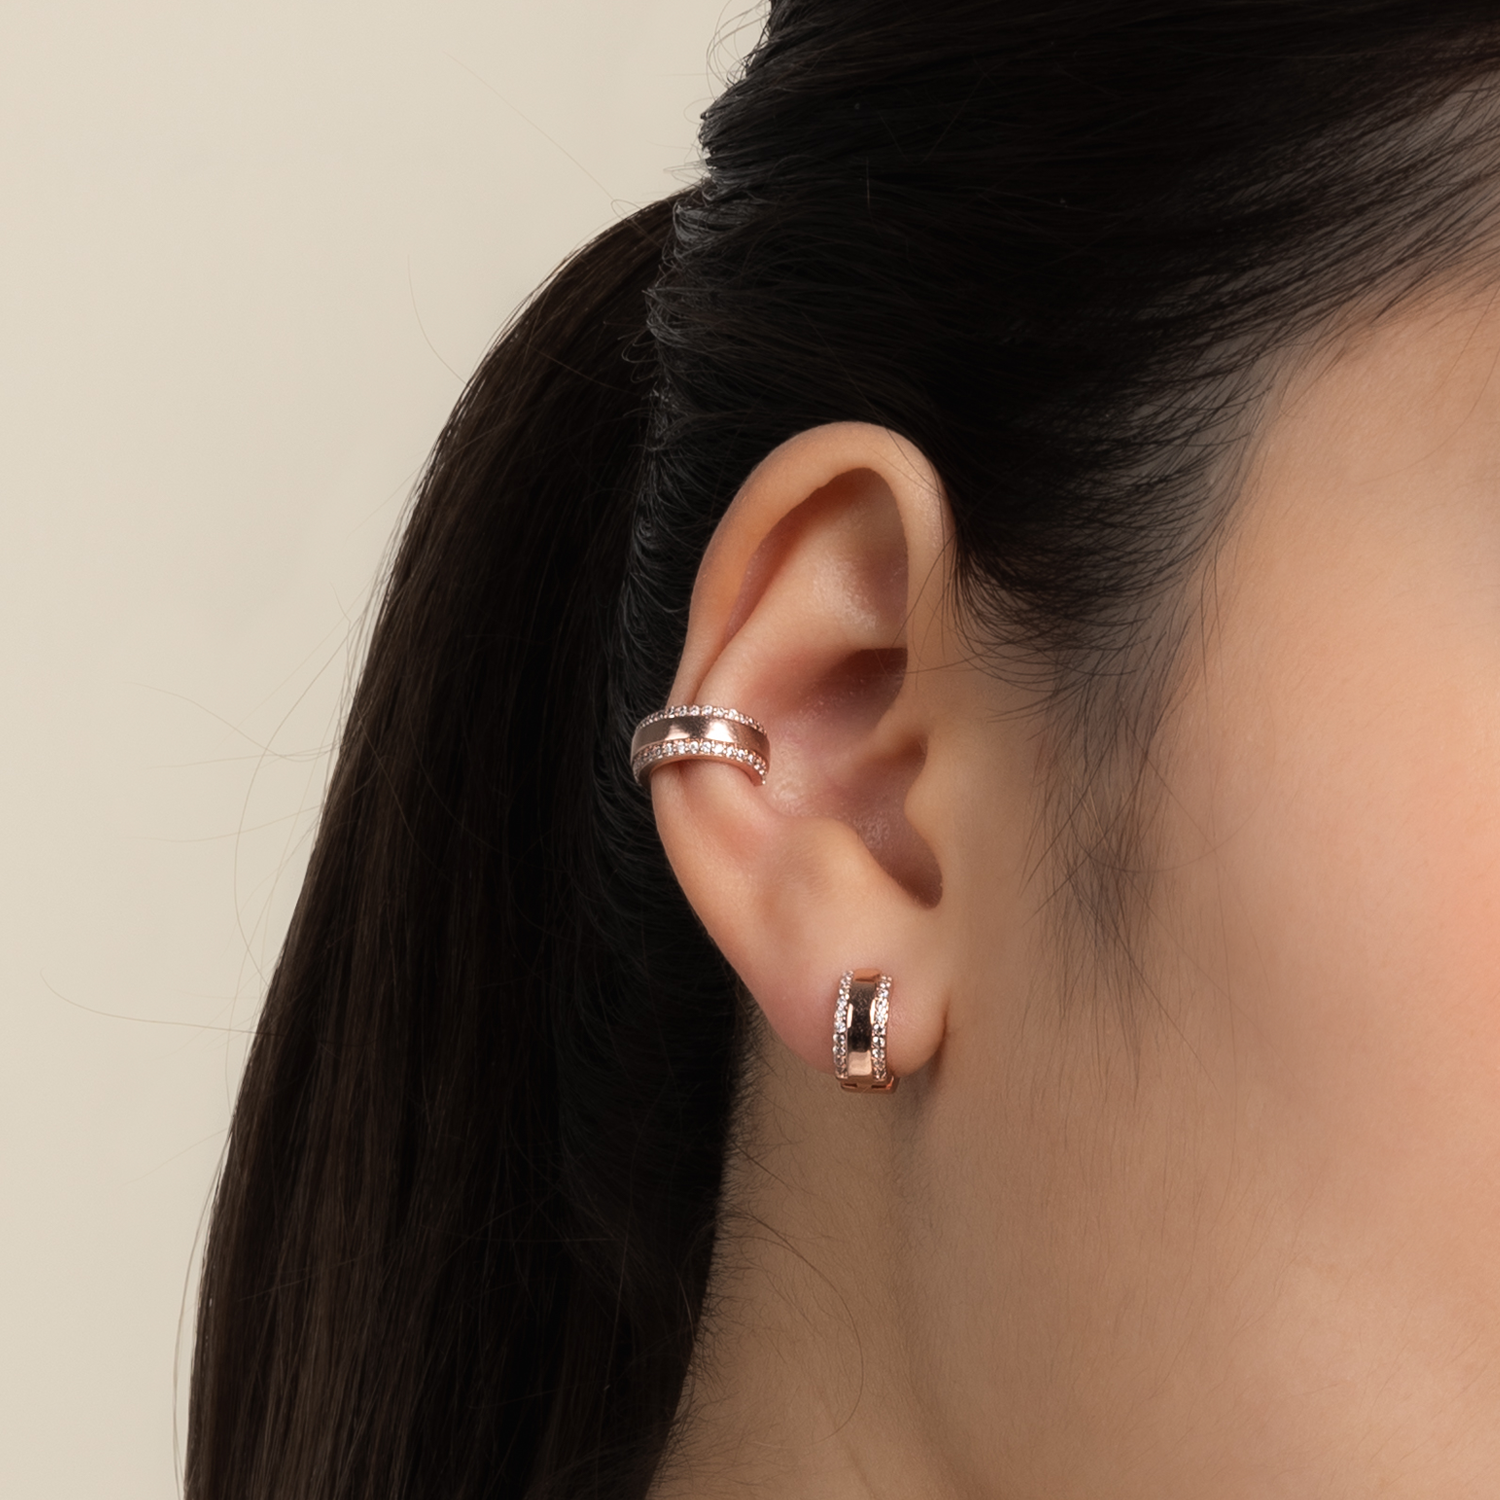 Model wears classic and elegant ear cuff in rose gold with cubic zirconia.